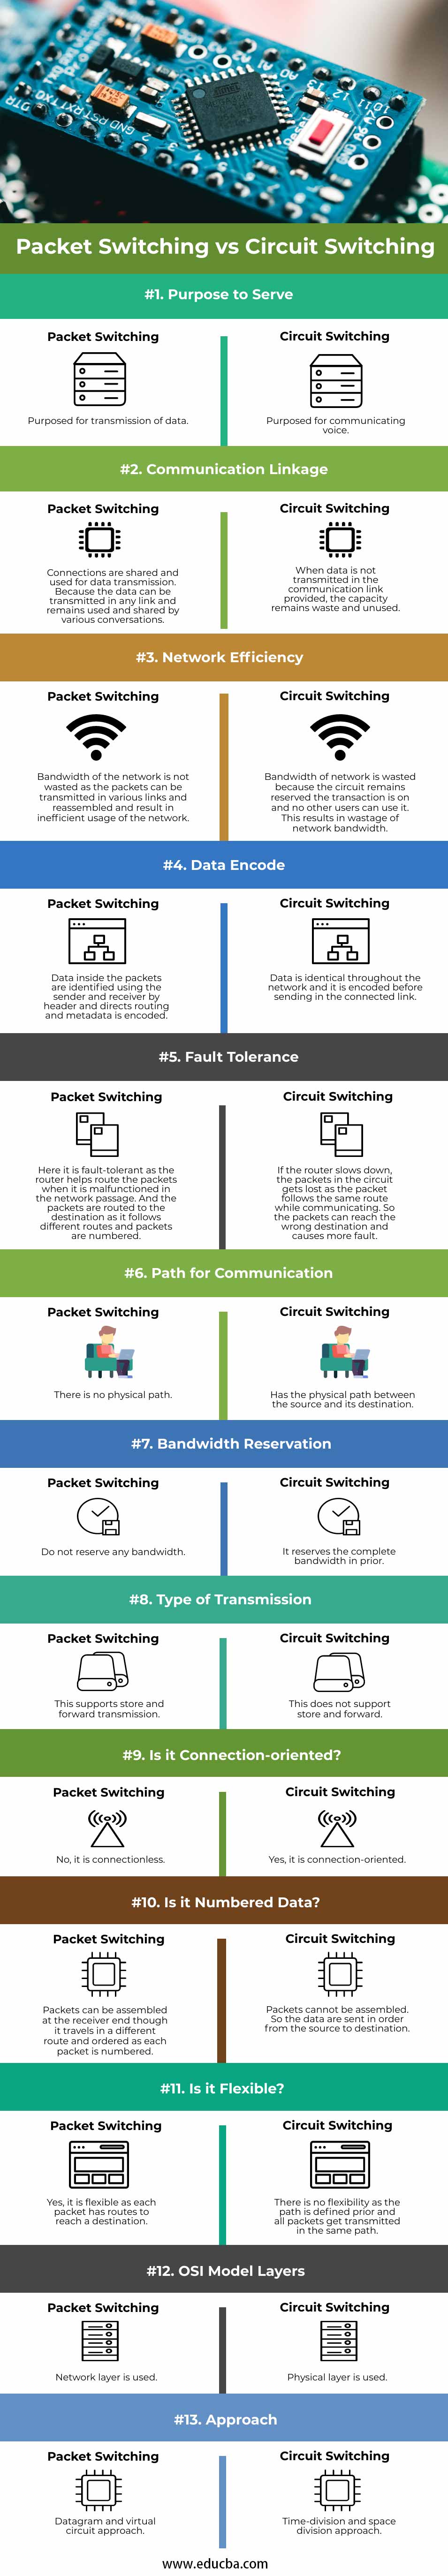 Packet Switching vs Circuit Switching info